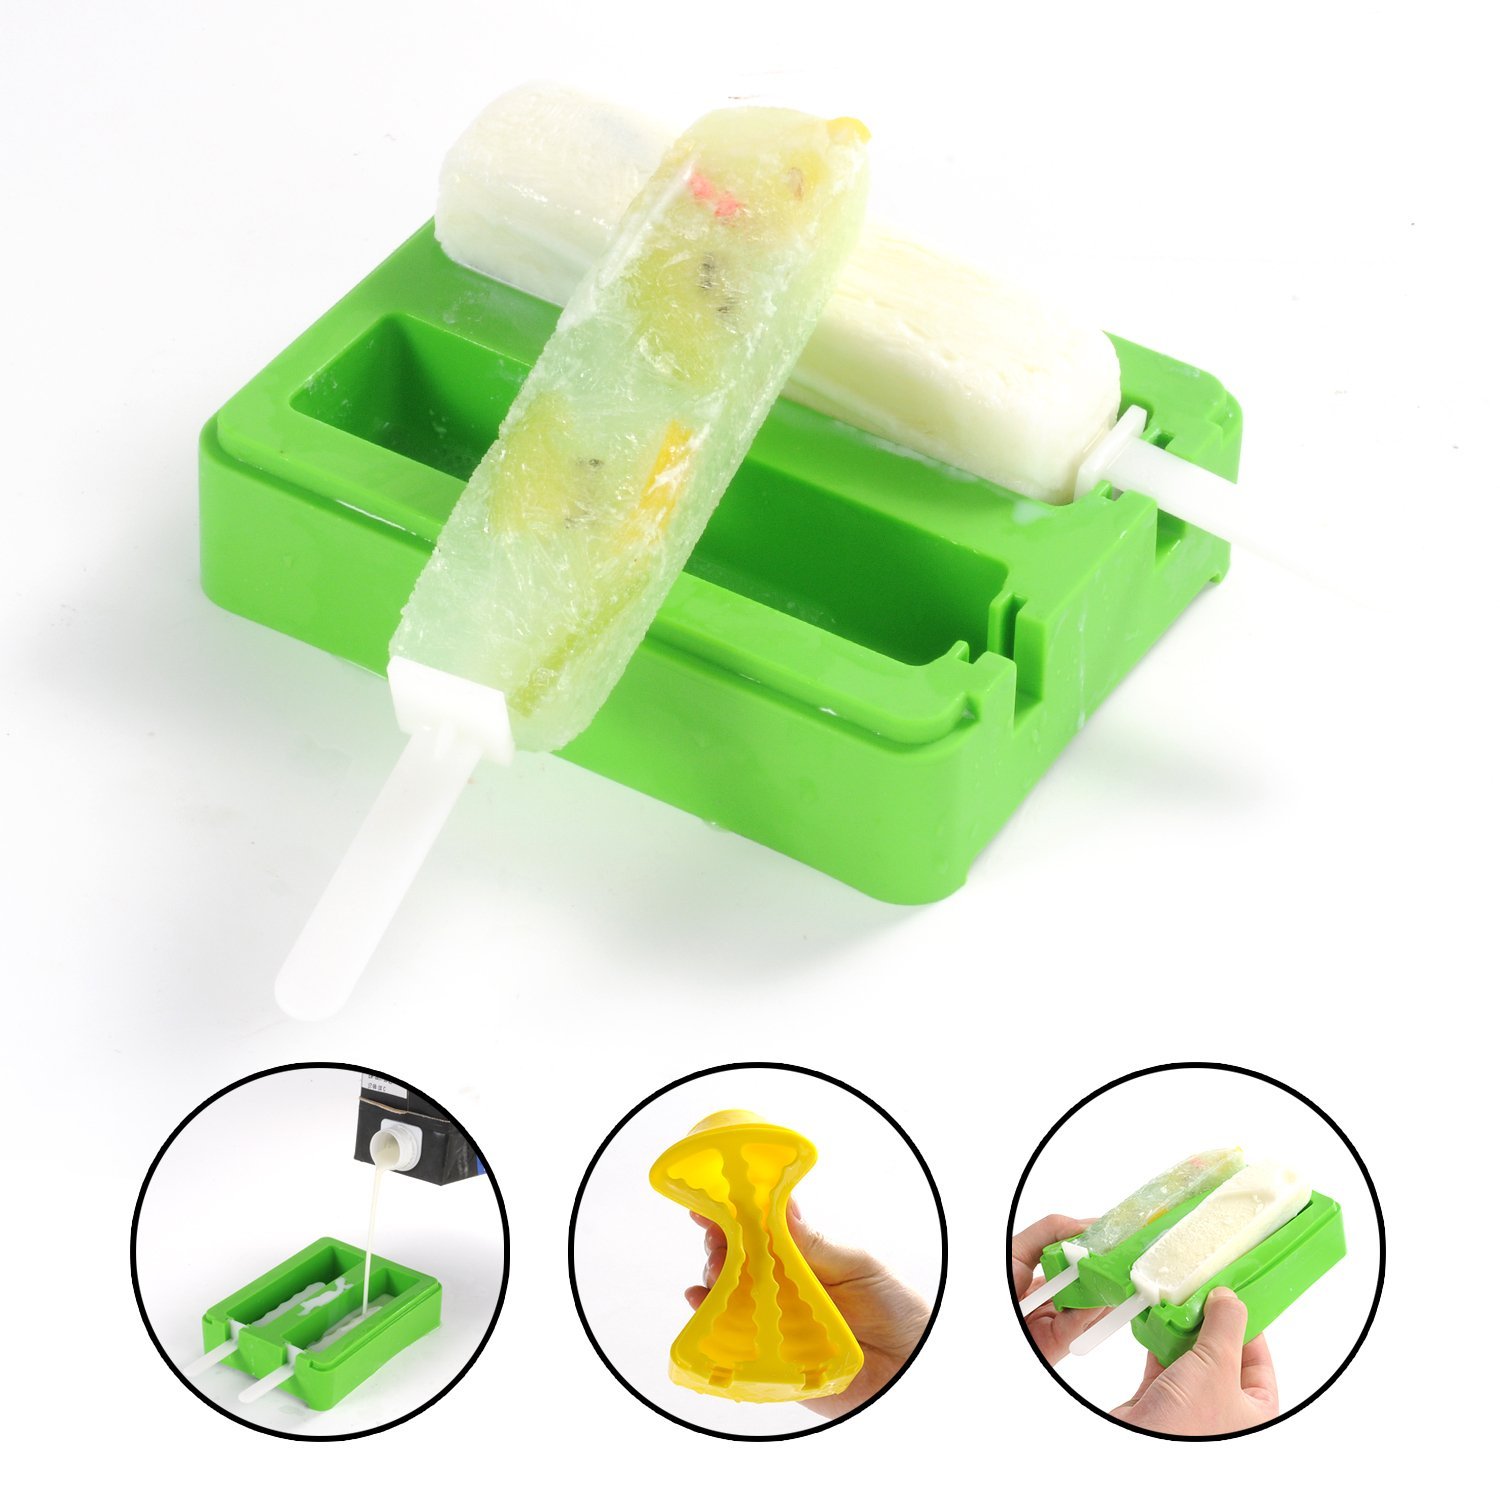 BPA Free Silicone Popsicle Molds, Silicone Popsicle Maker Ice Pop Moldes com tampas